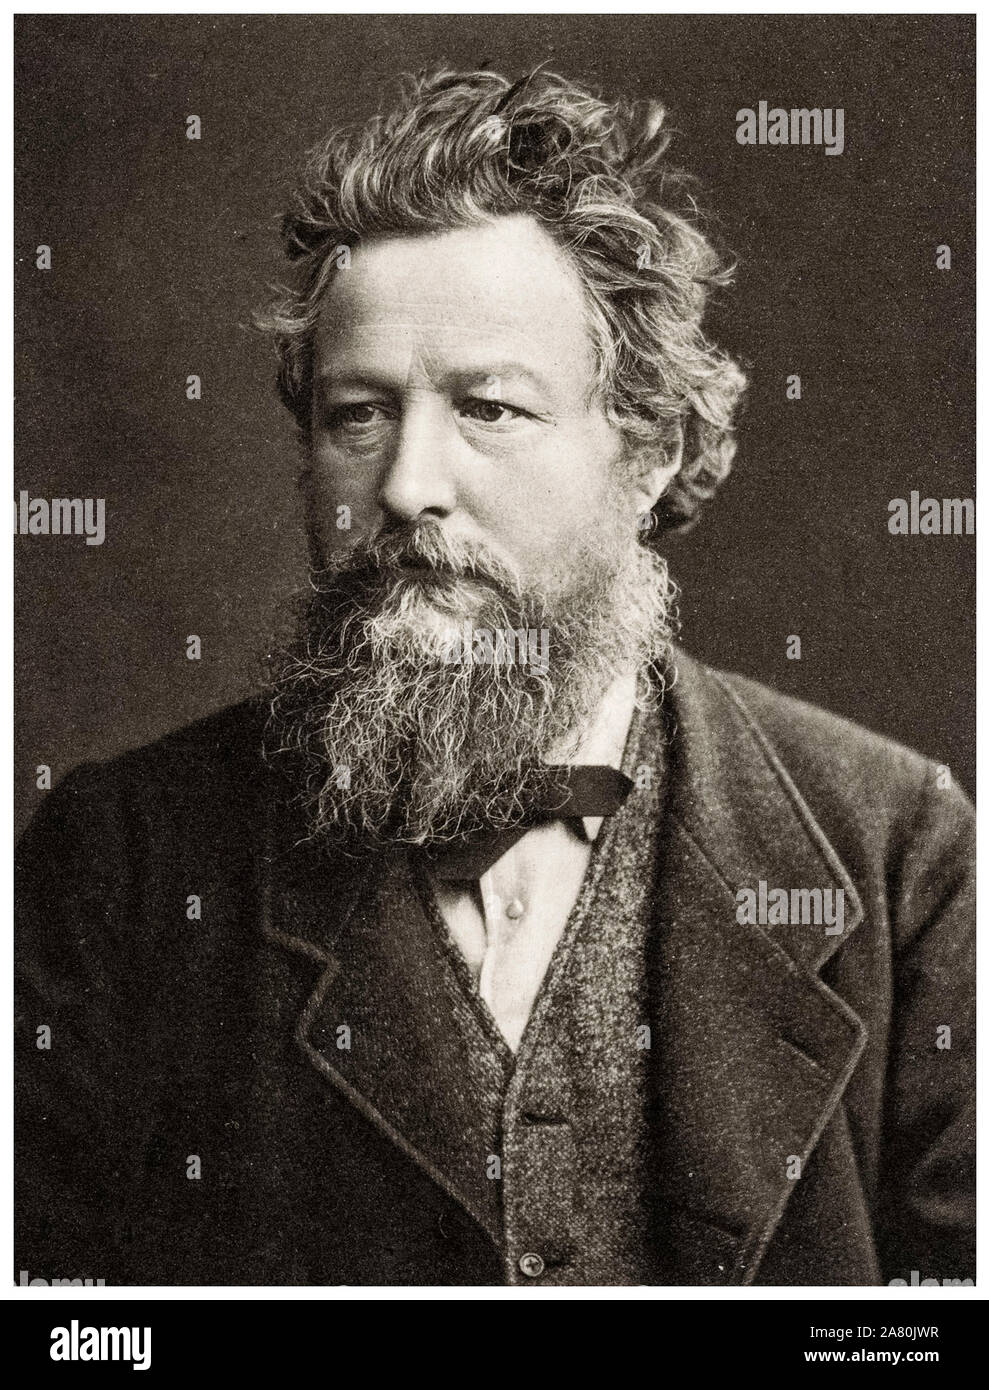 William Morris, Portrait of the Artist by Abel Lewis, photograph, 1887-1900 Stock Photo